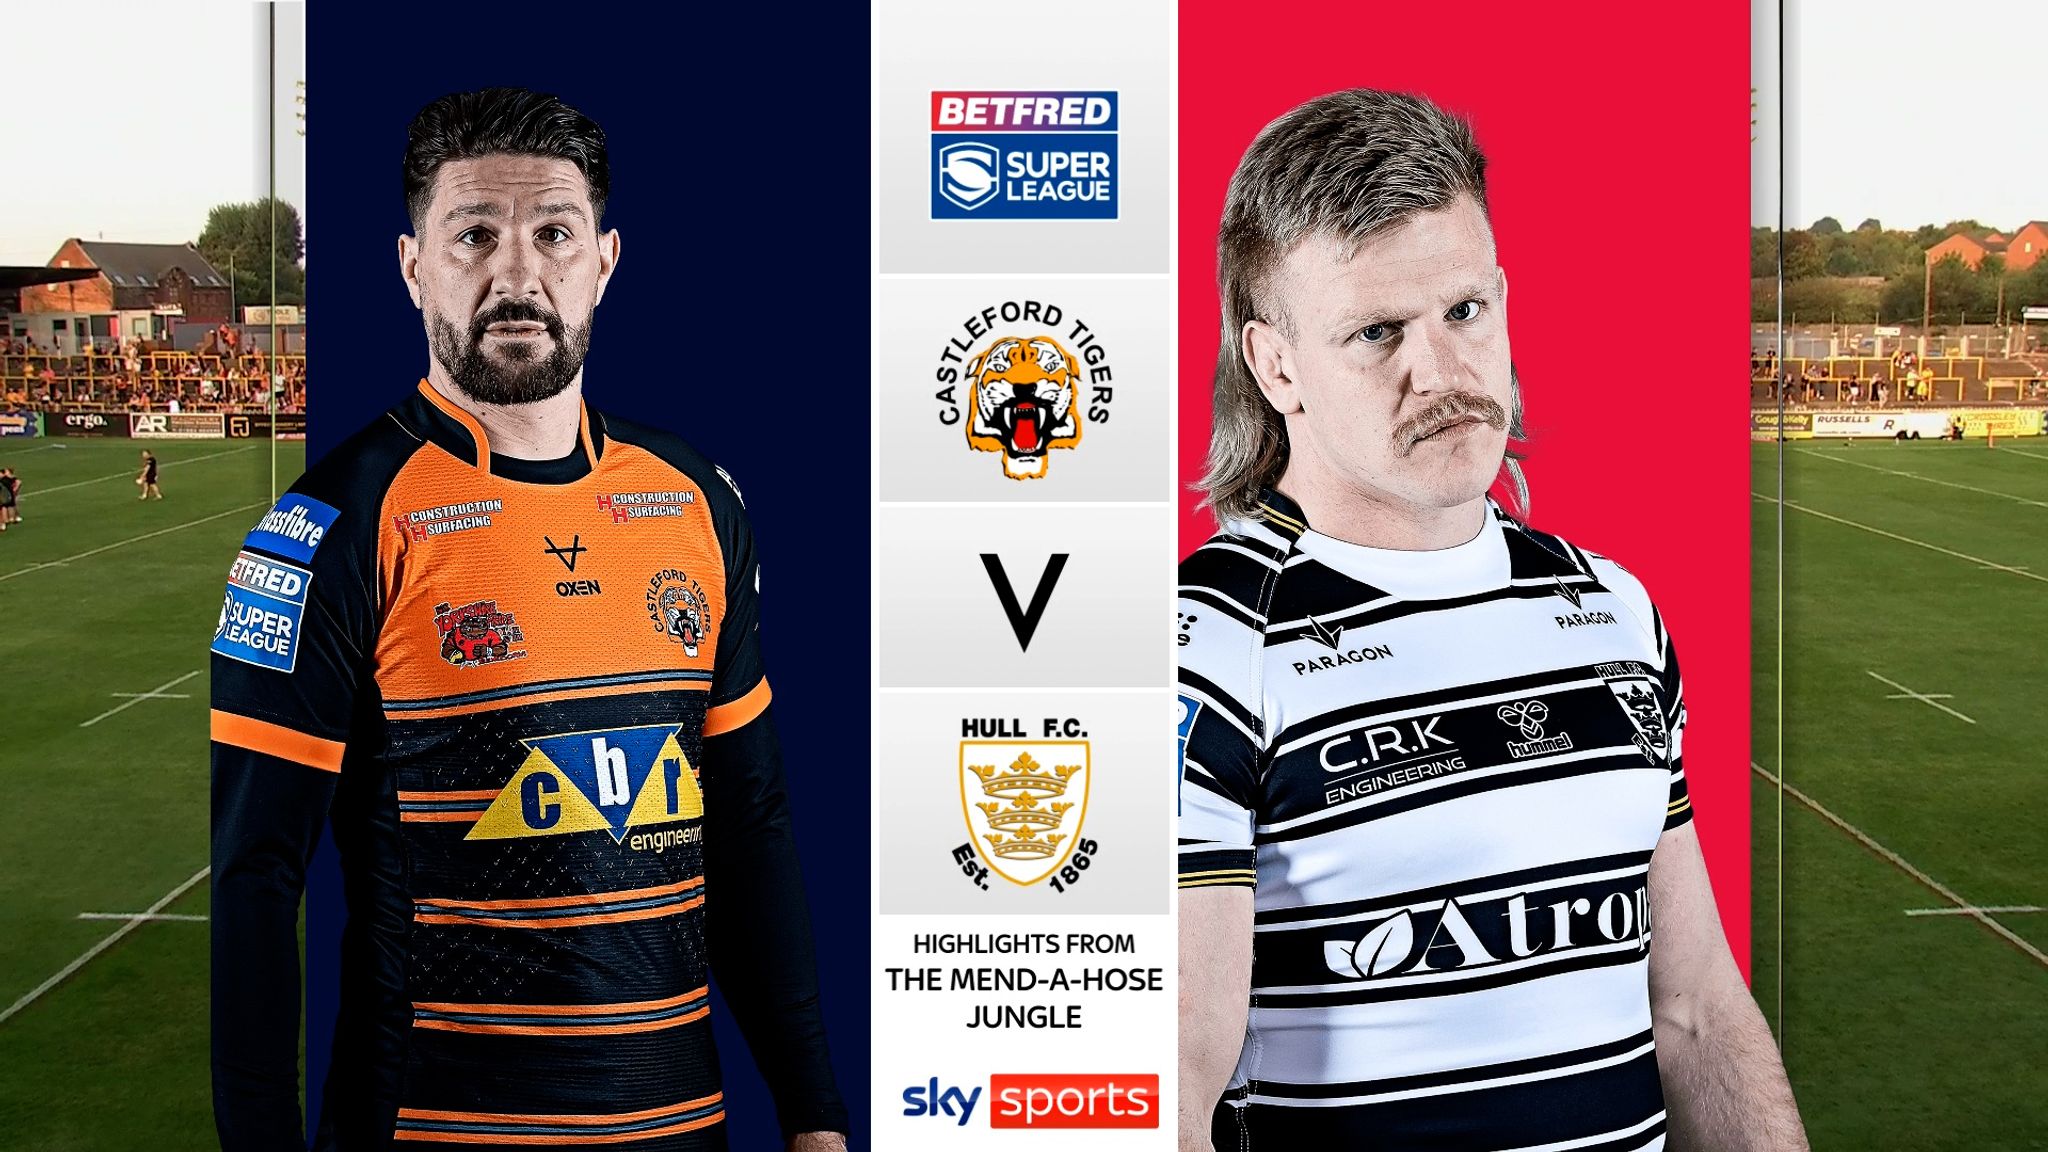 Castleford Tigers 29-12 Hull FC Super League Highlights Video Watch TV Show Sky Sports